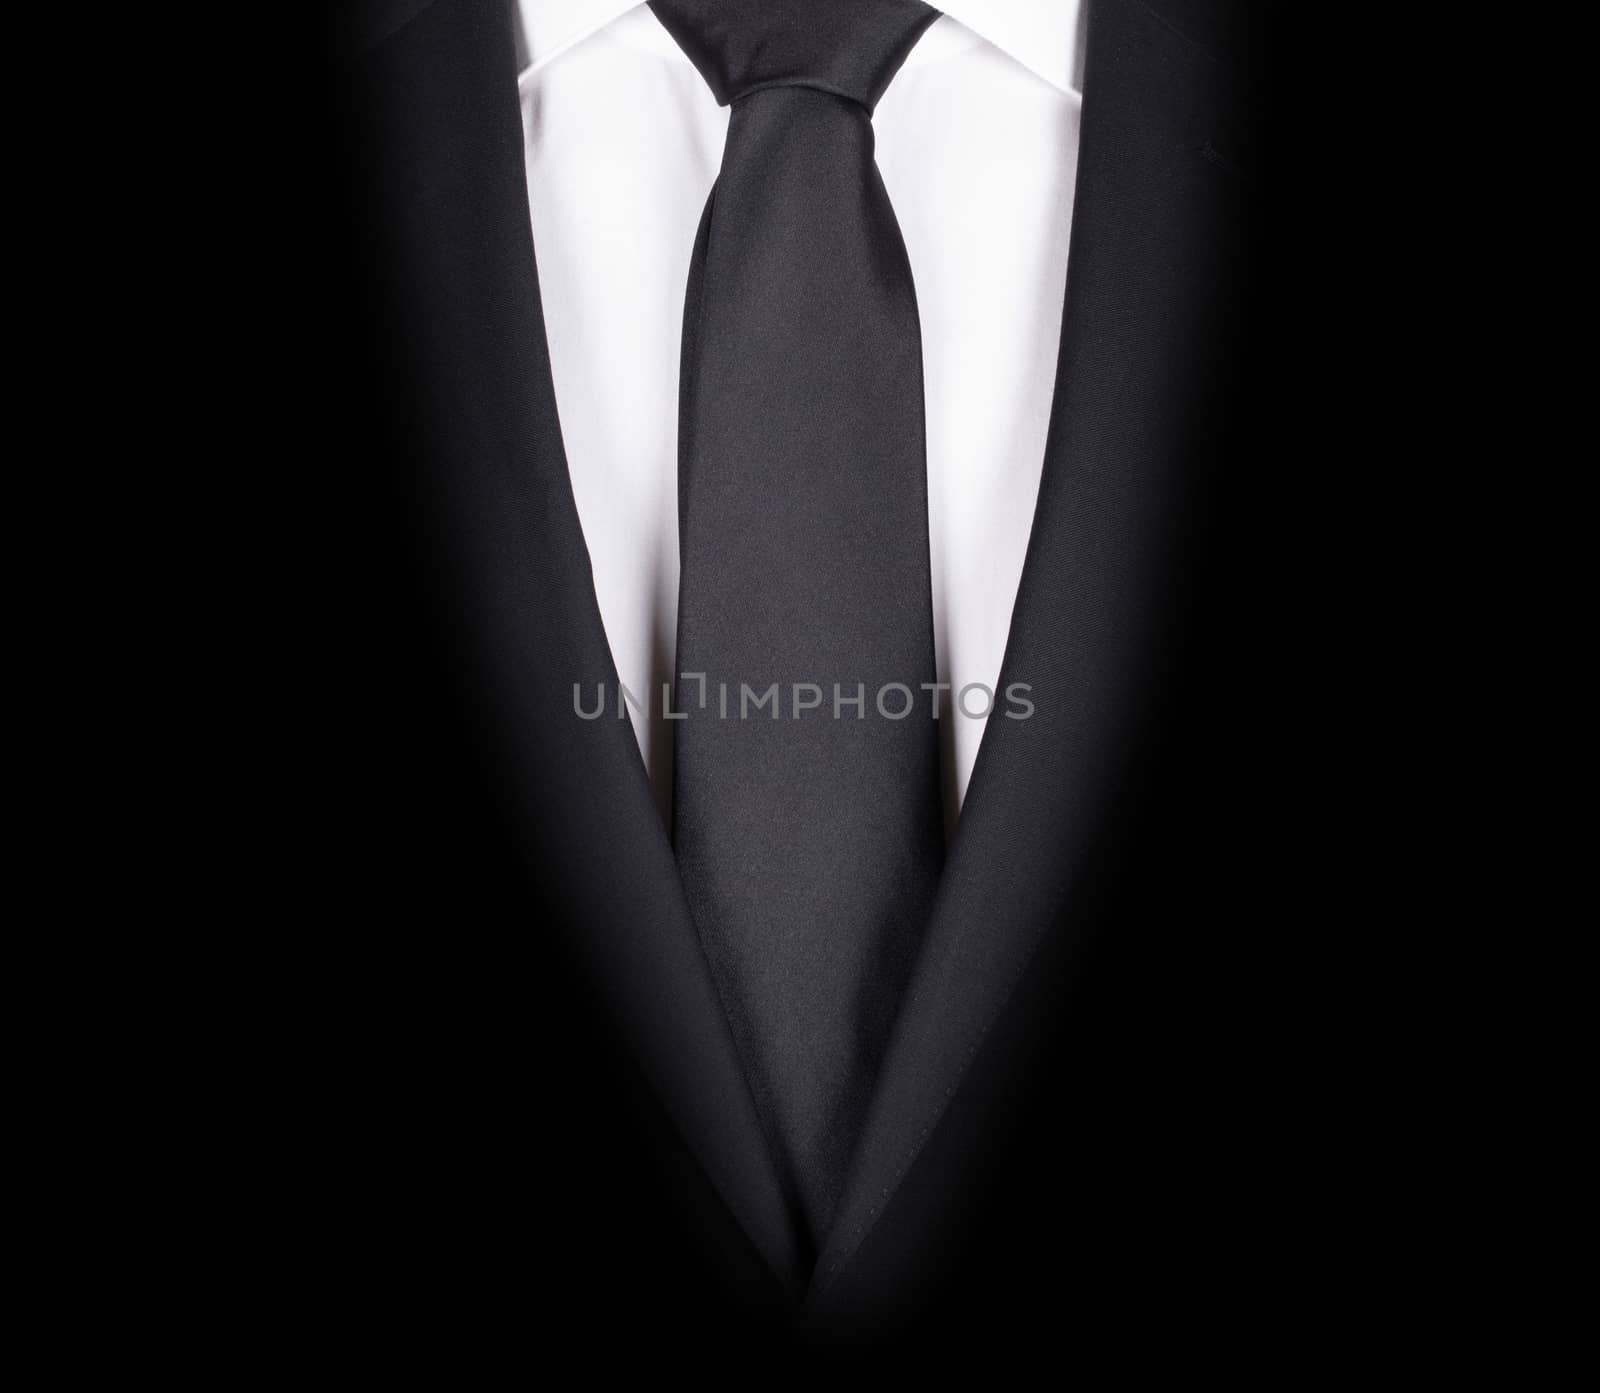 Man in a black suit with black tie, close-up